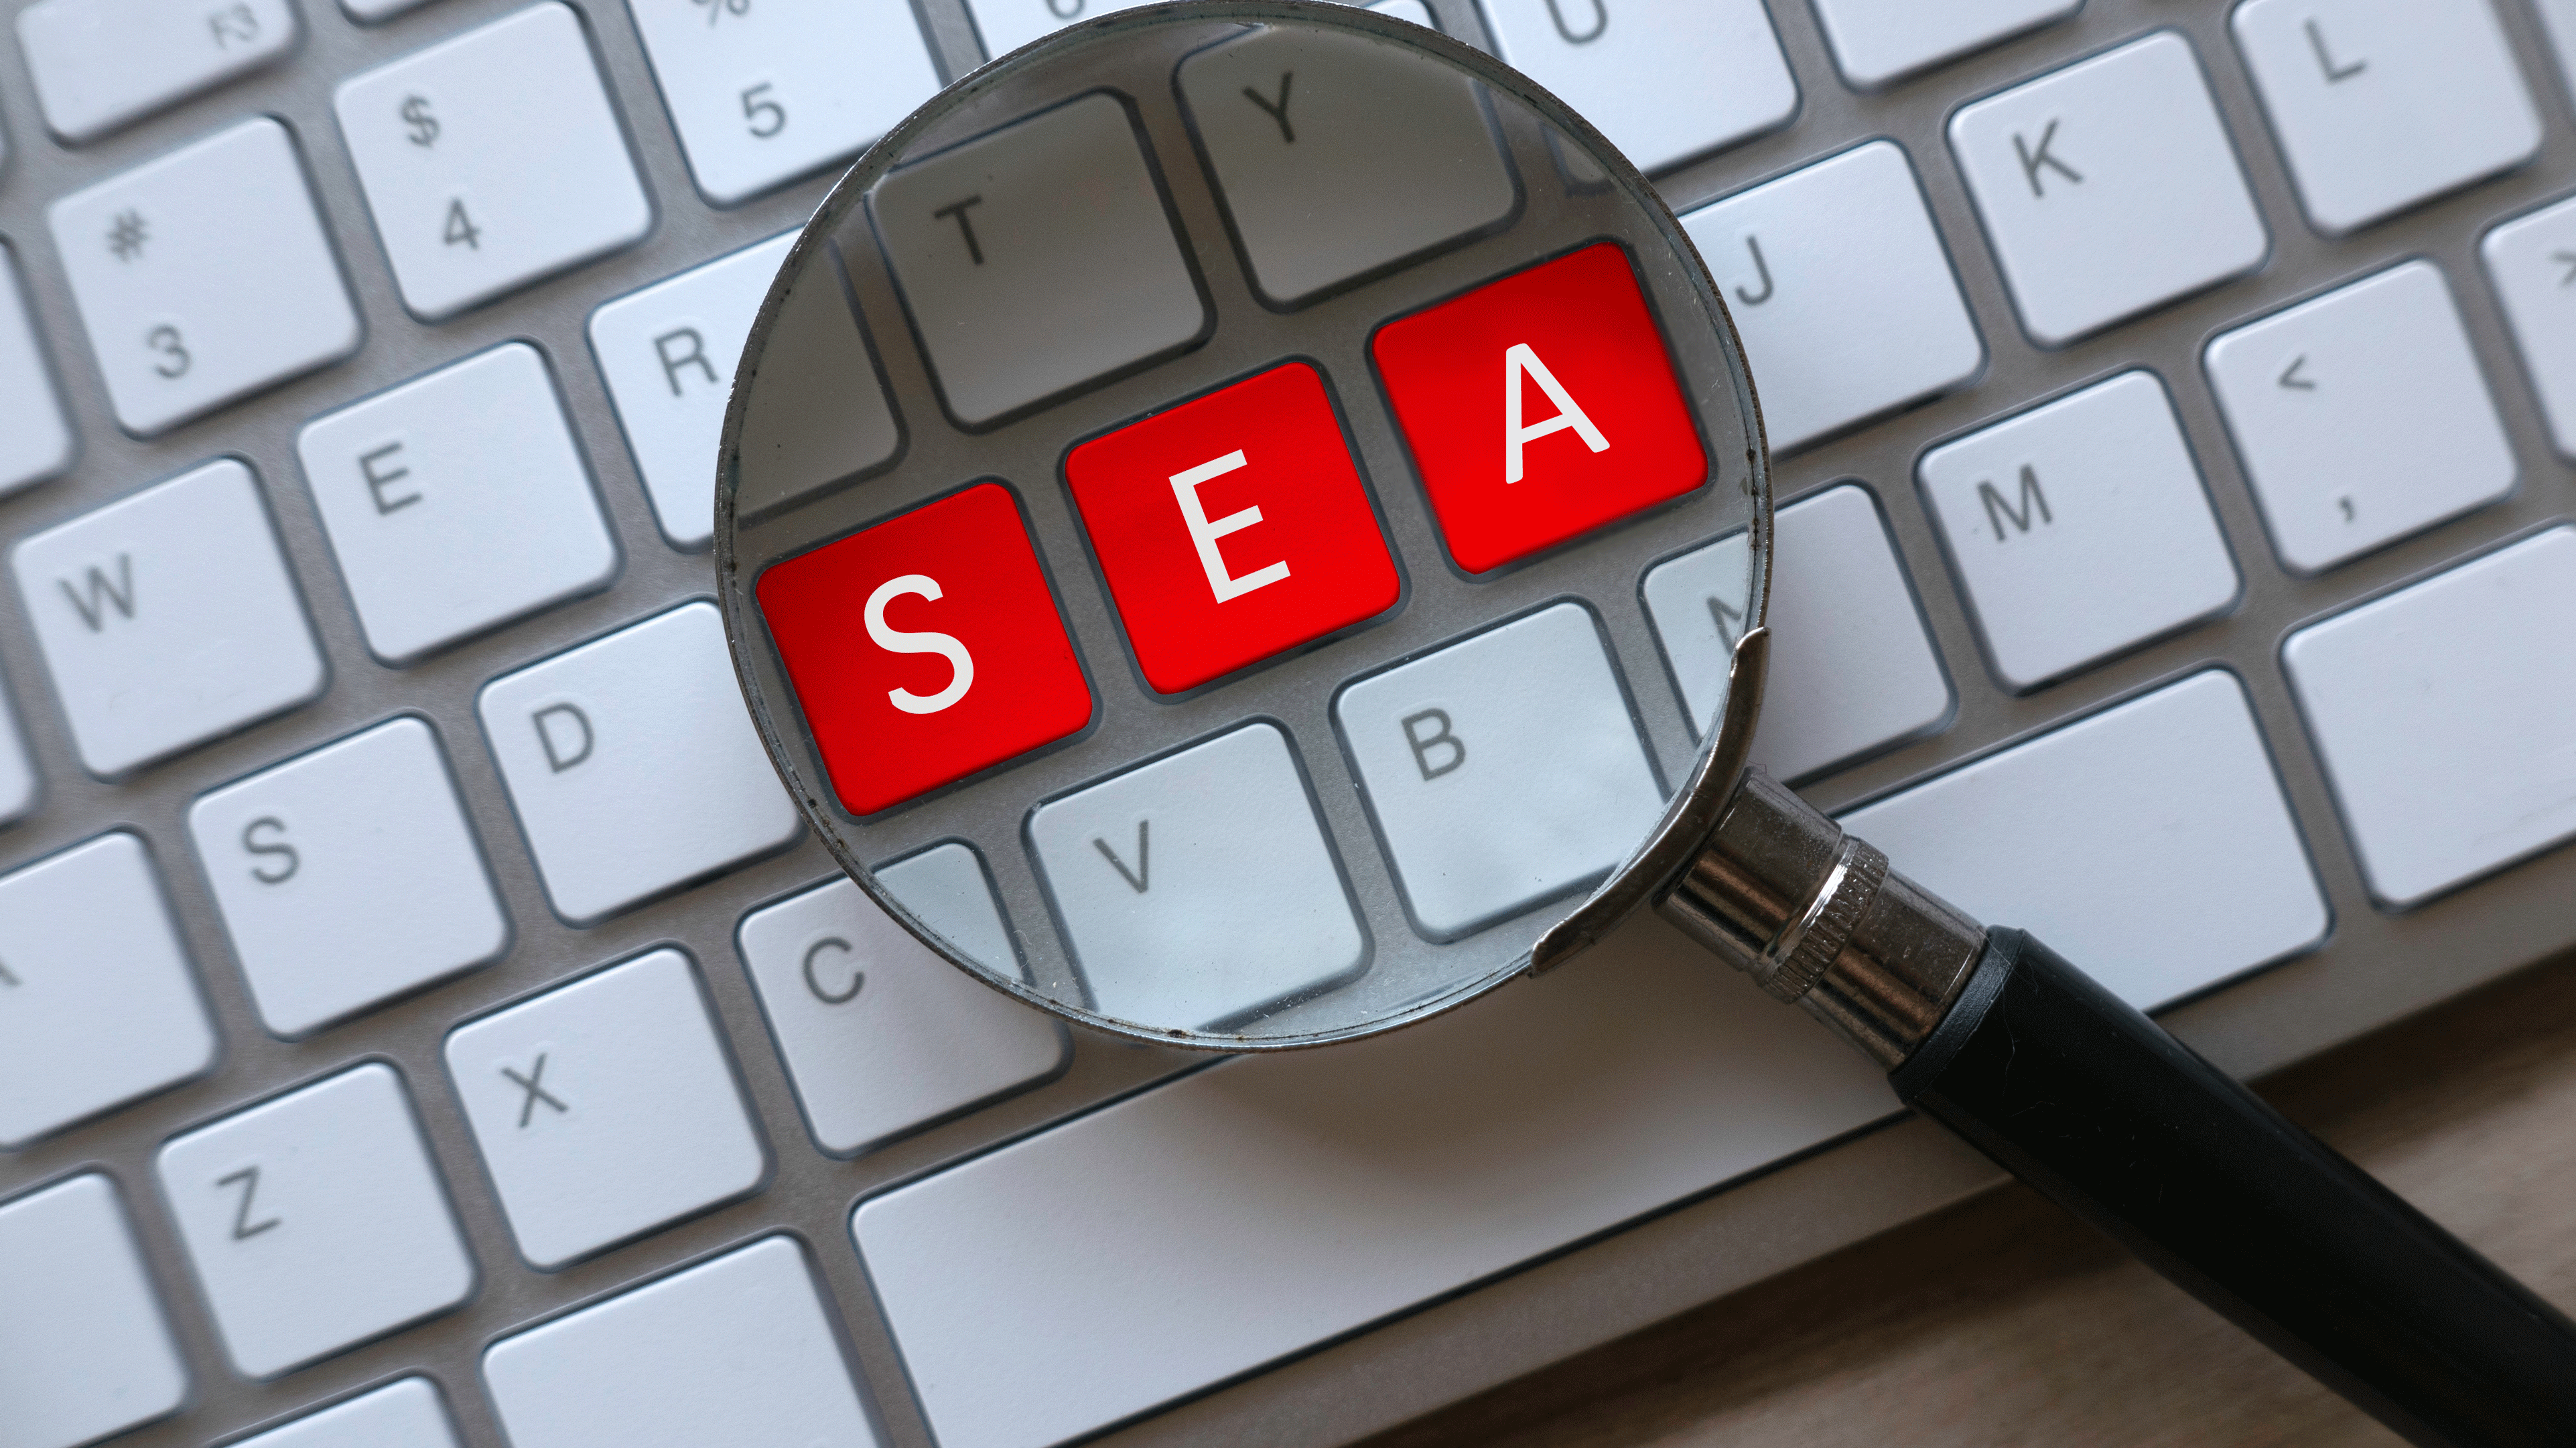 SEA (Search Engine Advertising)